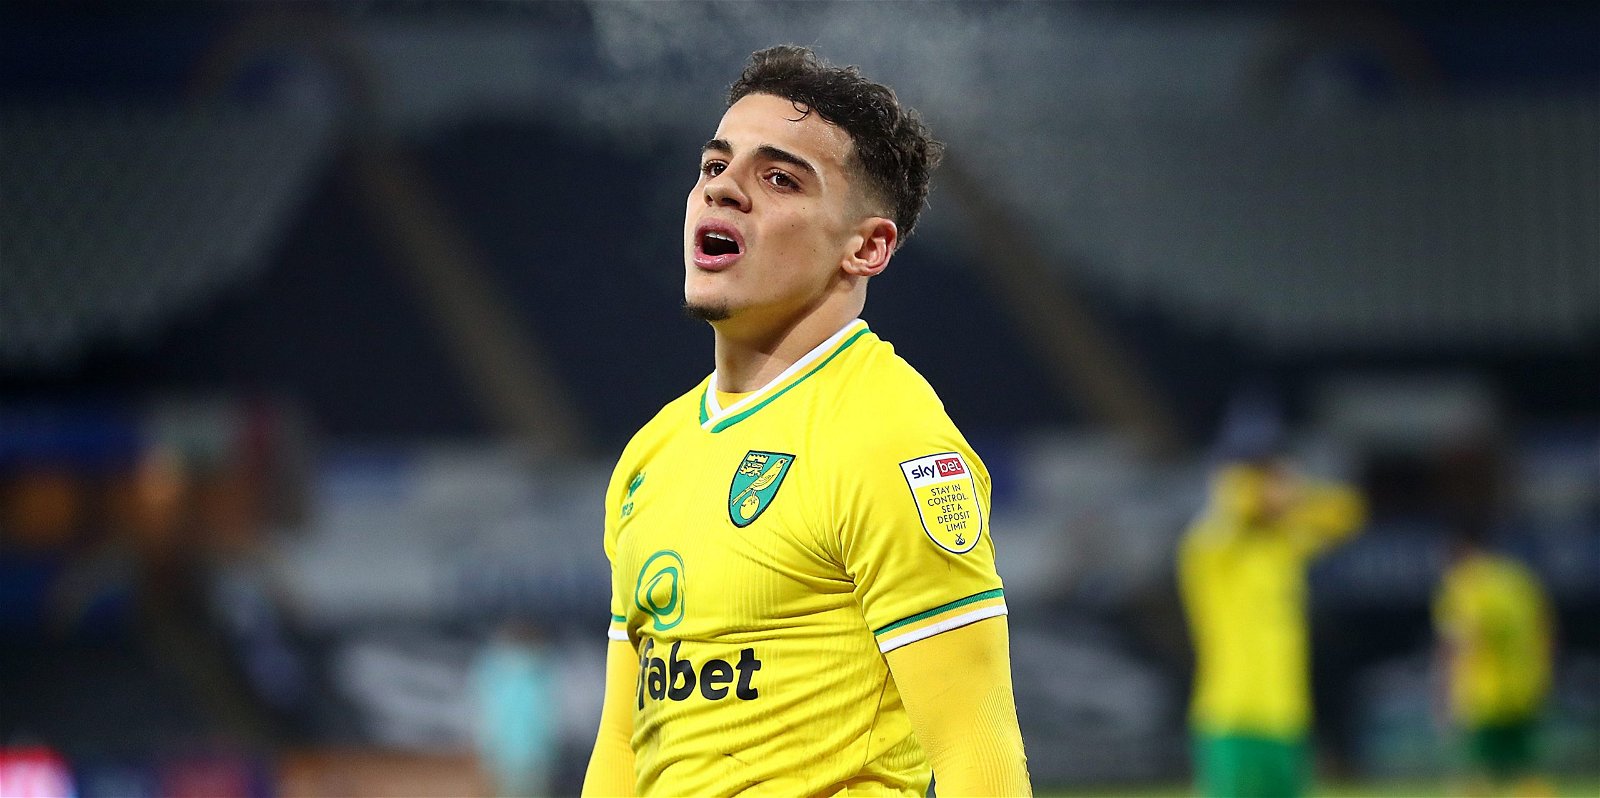 , Norwich City mainstay Smith says it is inevitable that Manchester United and Bayern Munich target will leave Canaries